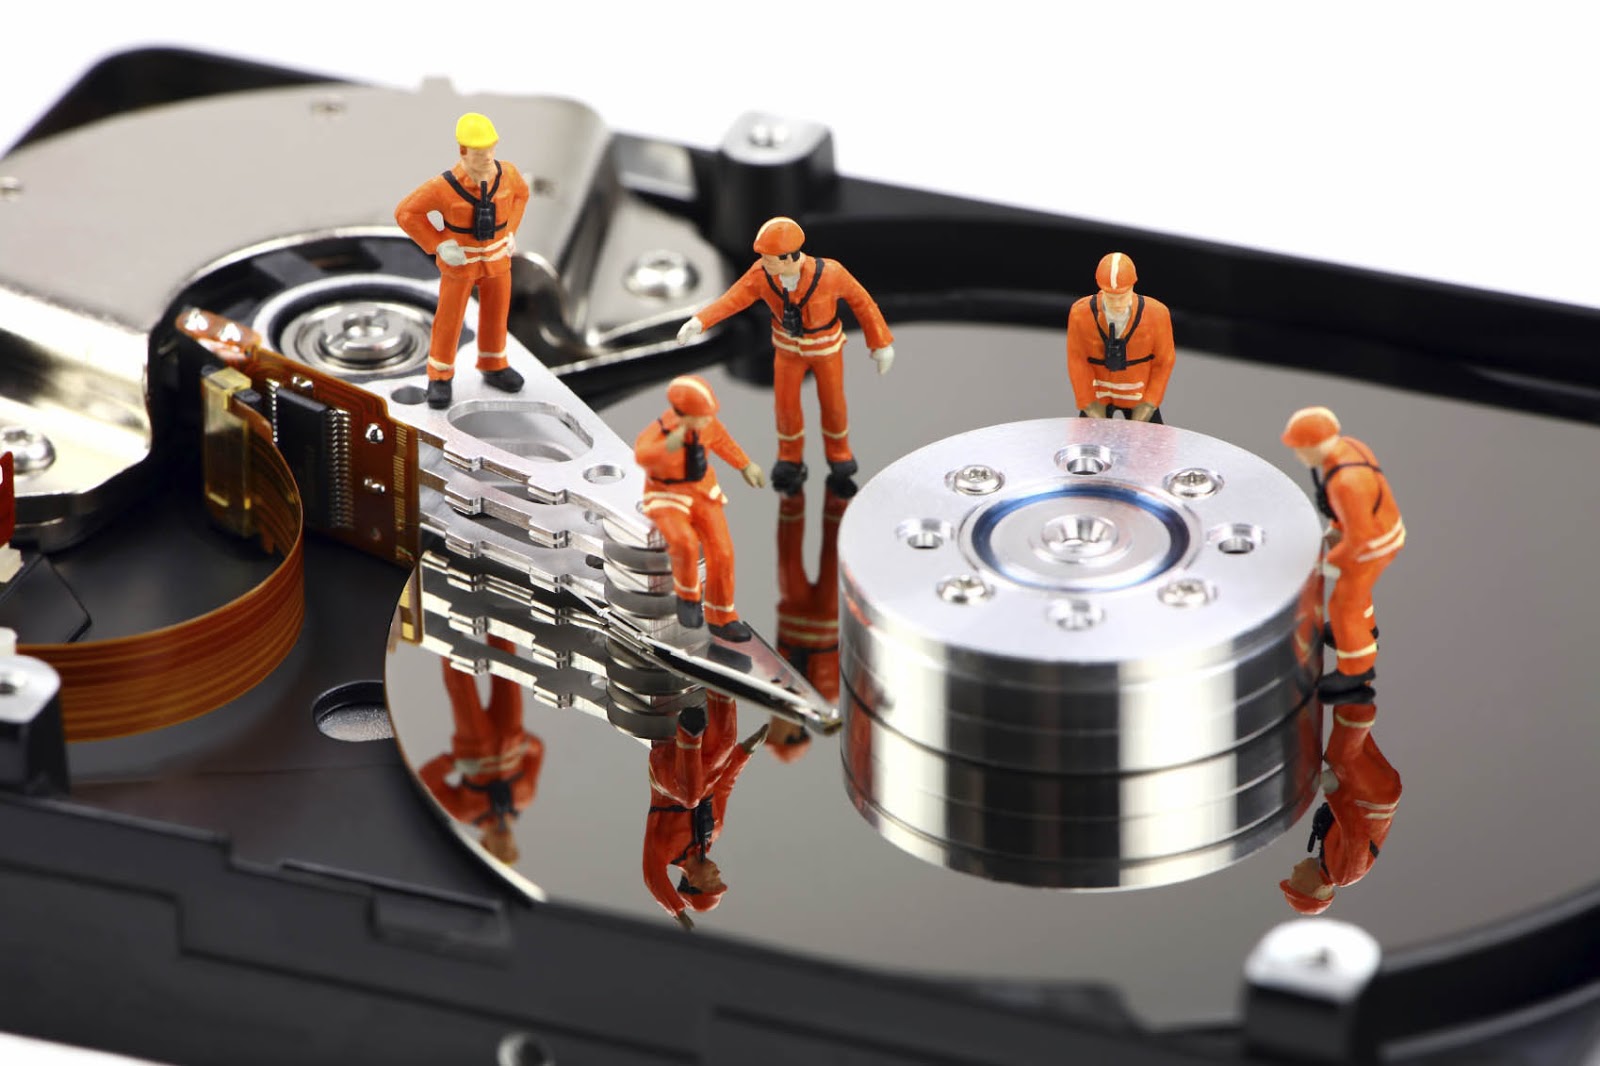 Top 10 Best Free Data Recovery Software to Recover Deleted Files